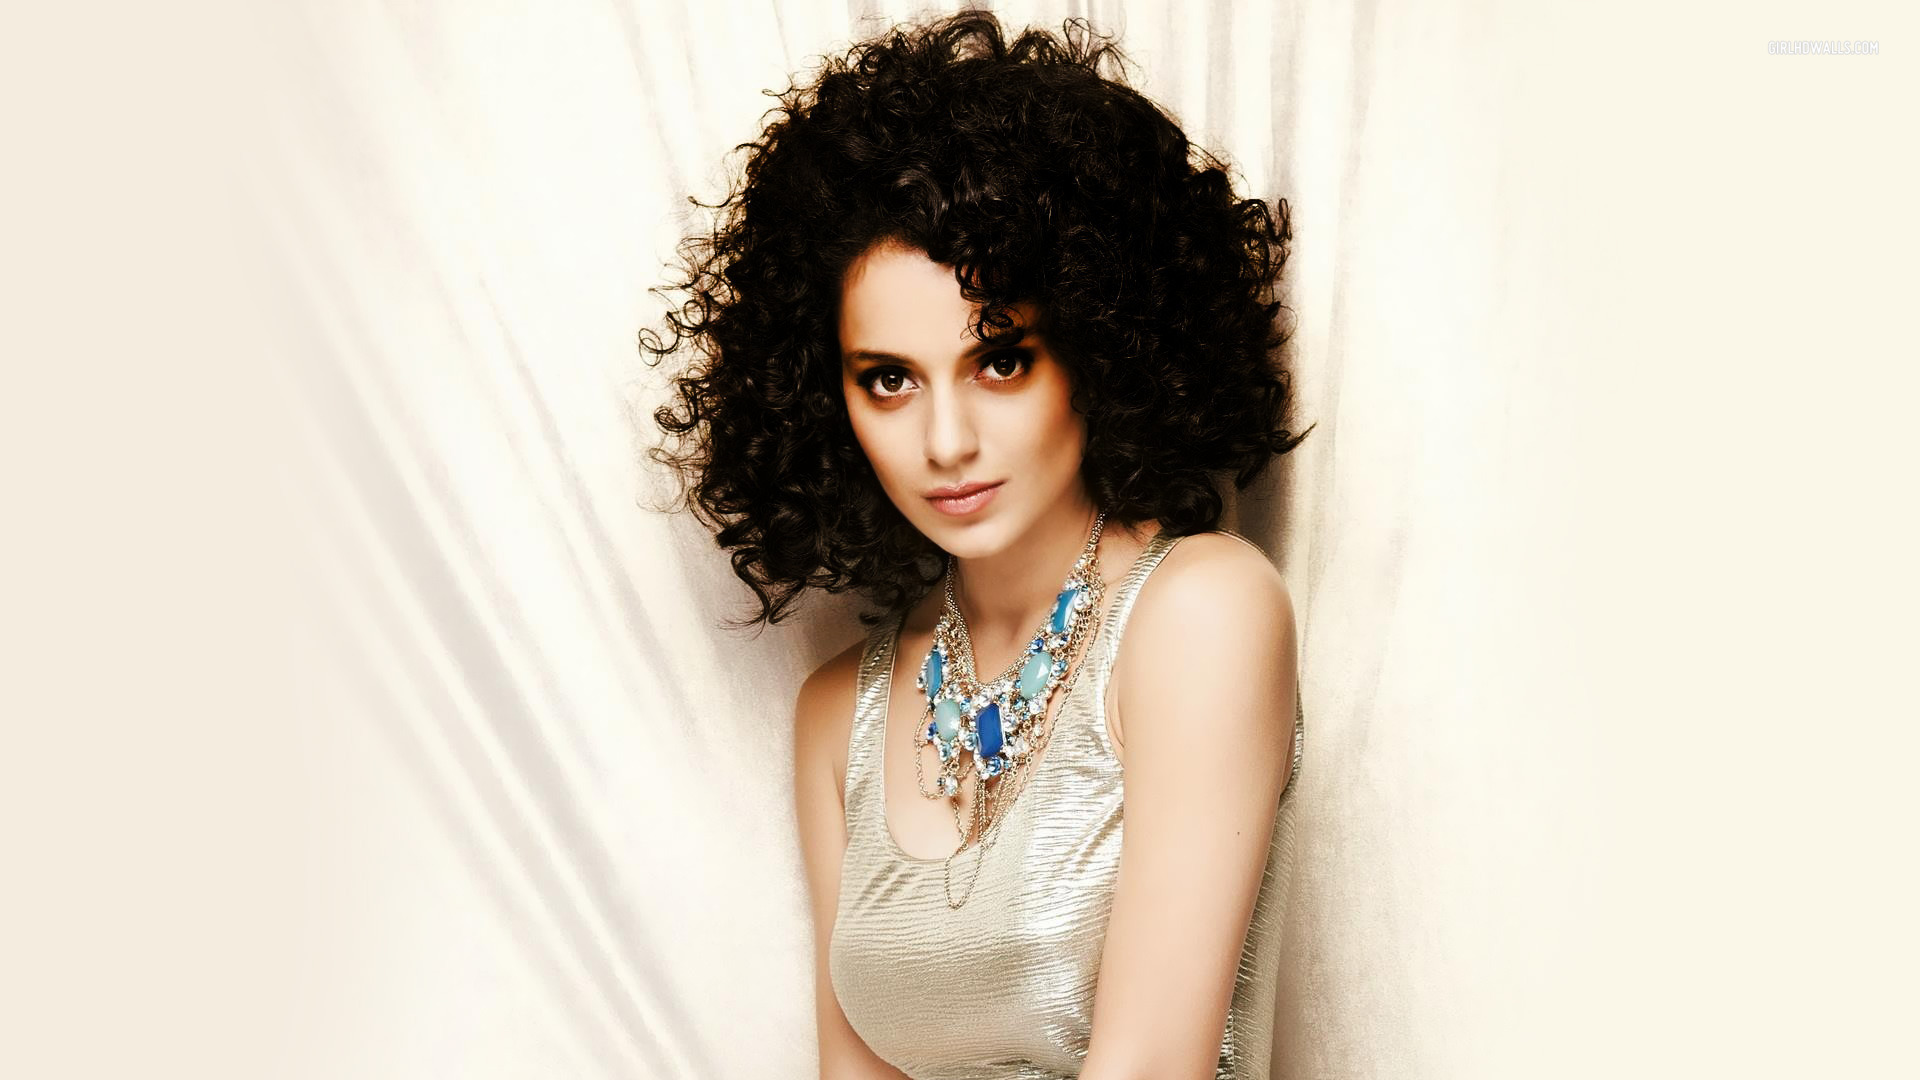 Kangana Ranaut responds to Saif Ali Khan's open letter on 'nepotism debate' with a feisty note!